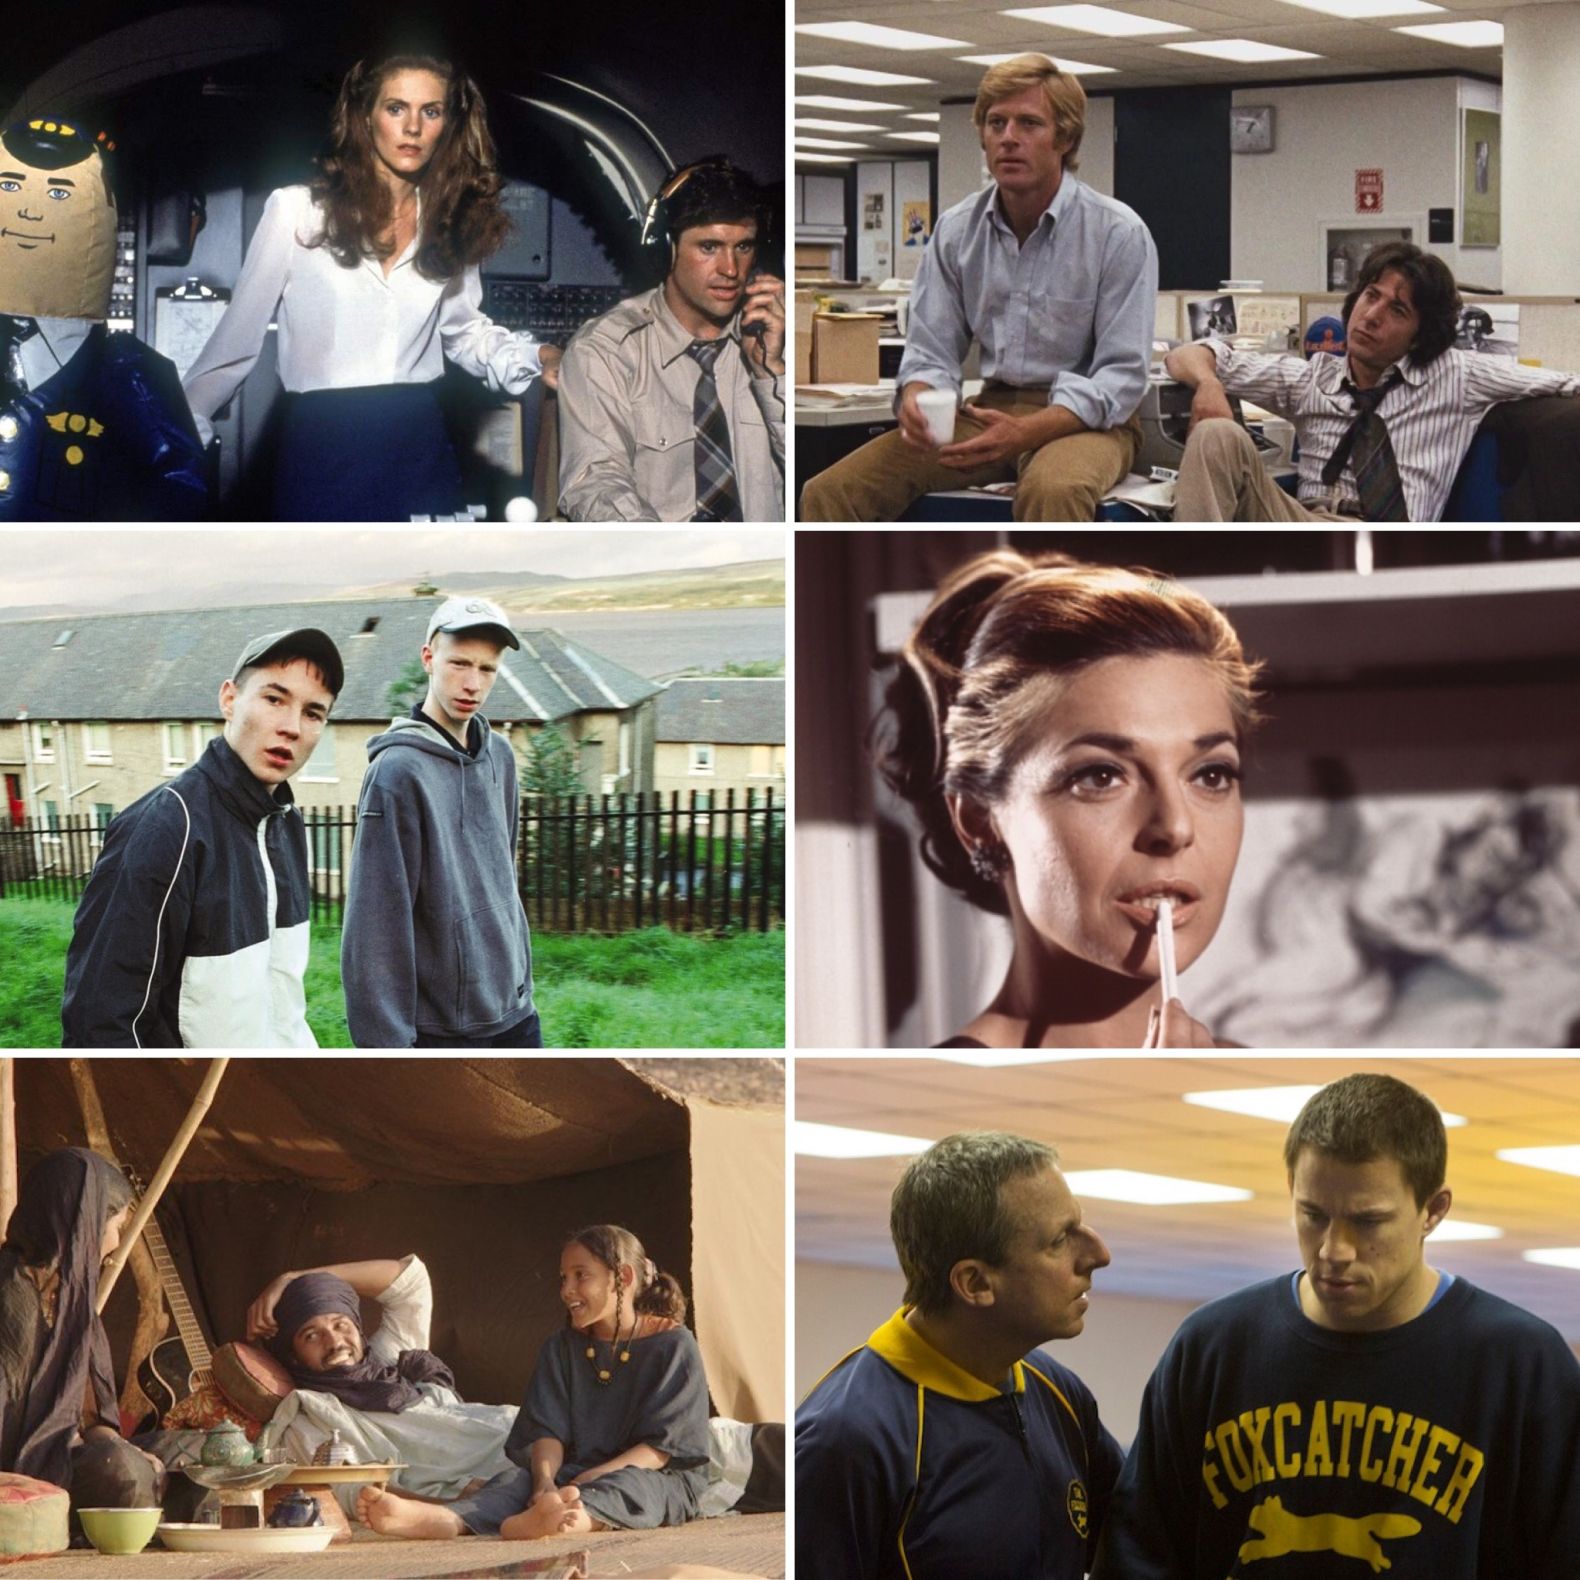 Duke Box #44: Our Guide to the Best Films on TV